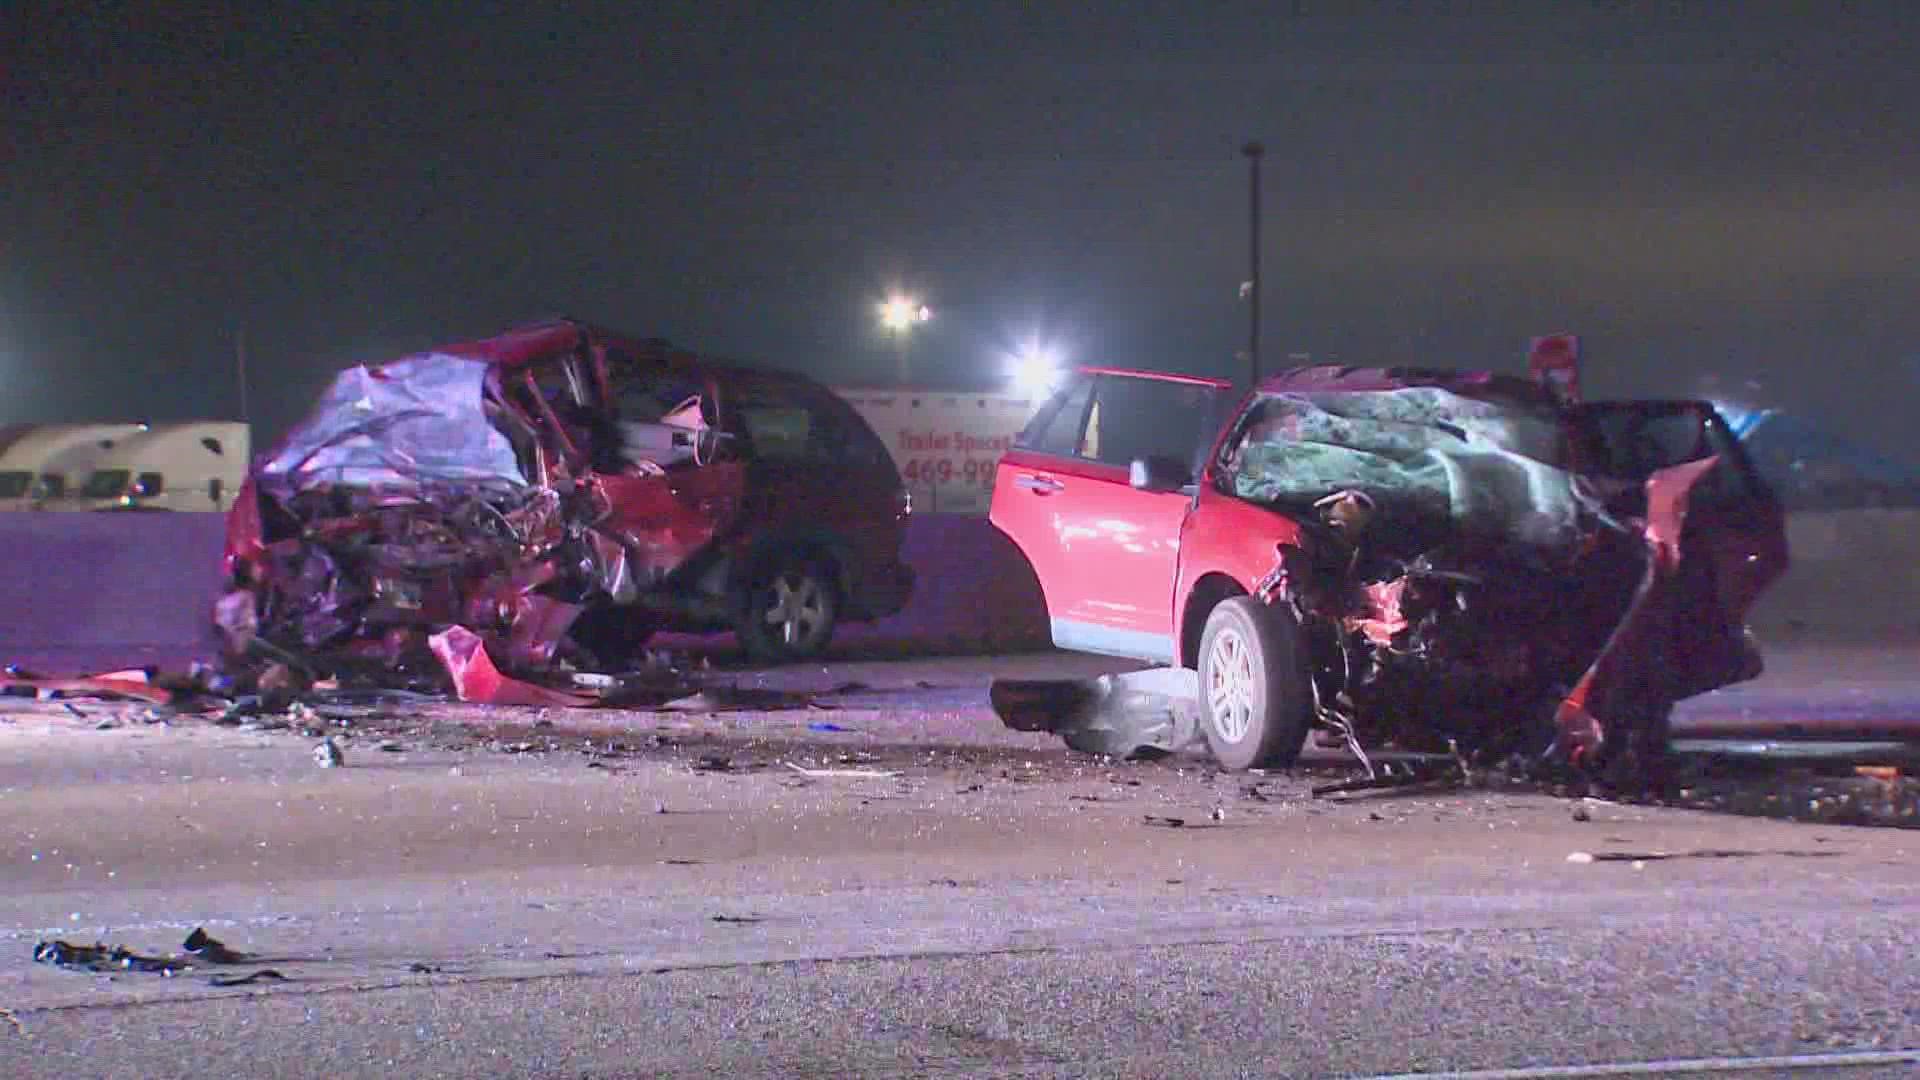 Police say a woman driving with two juveniles in the wrong-way vehicle were killed as well as a man driving in the other vehicle.